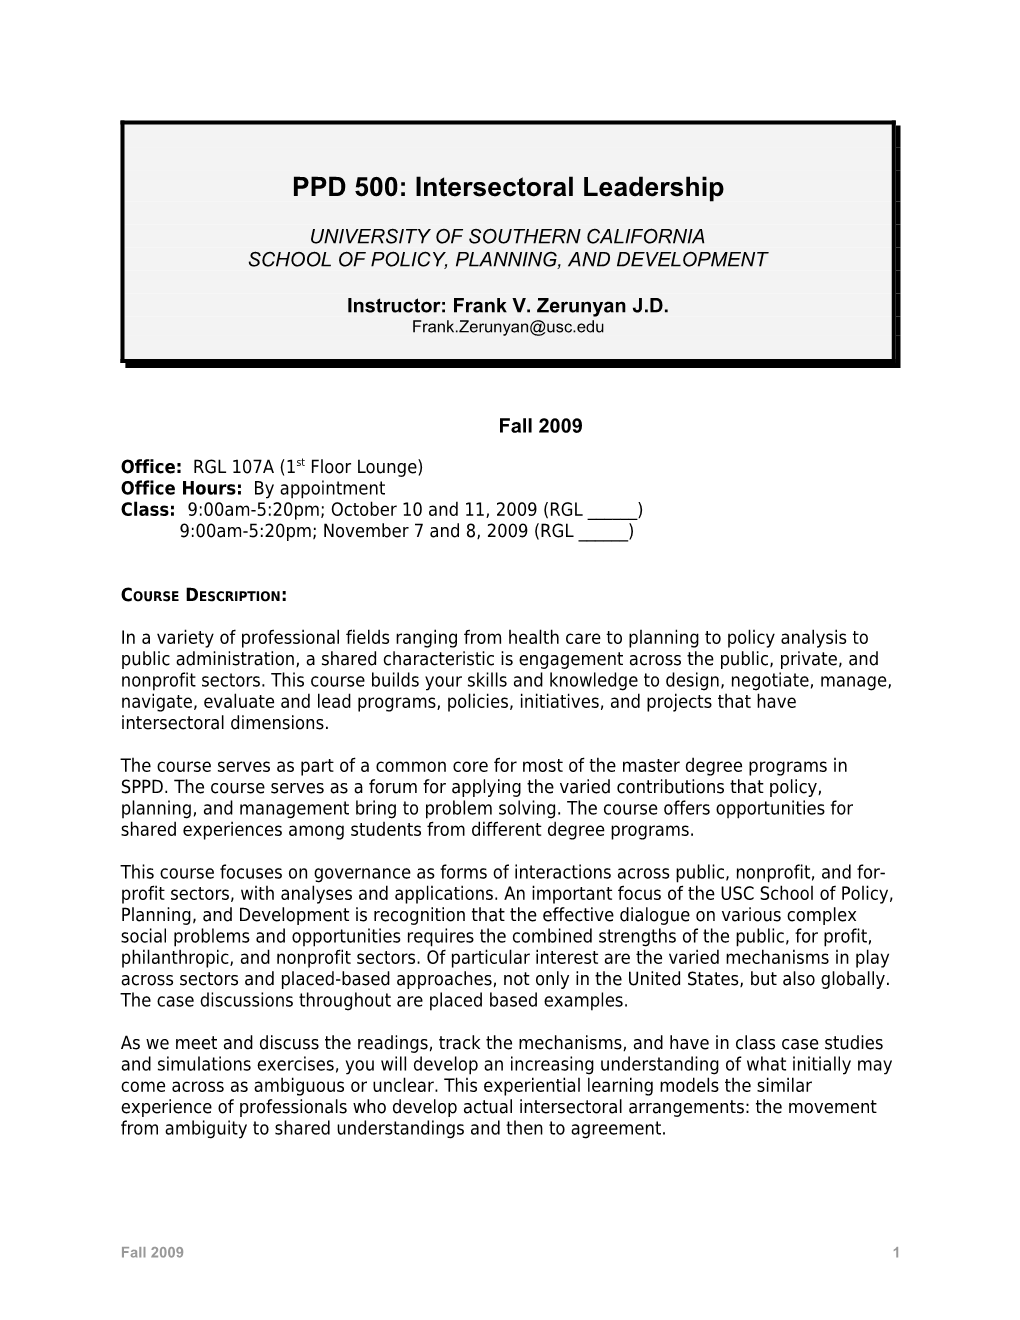 PPD 500: Intersectoral Leadership